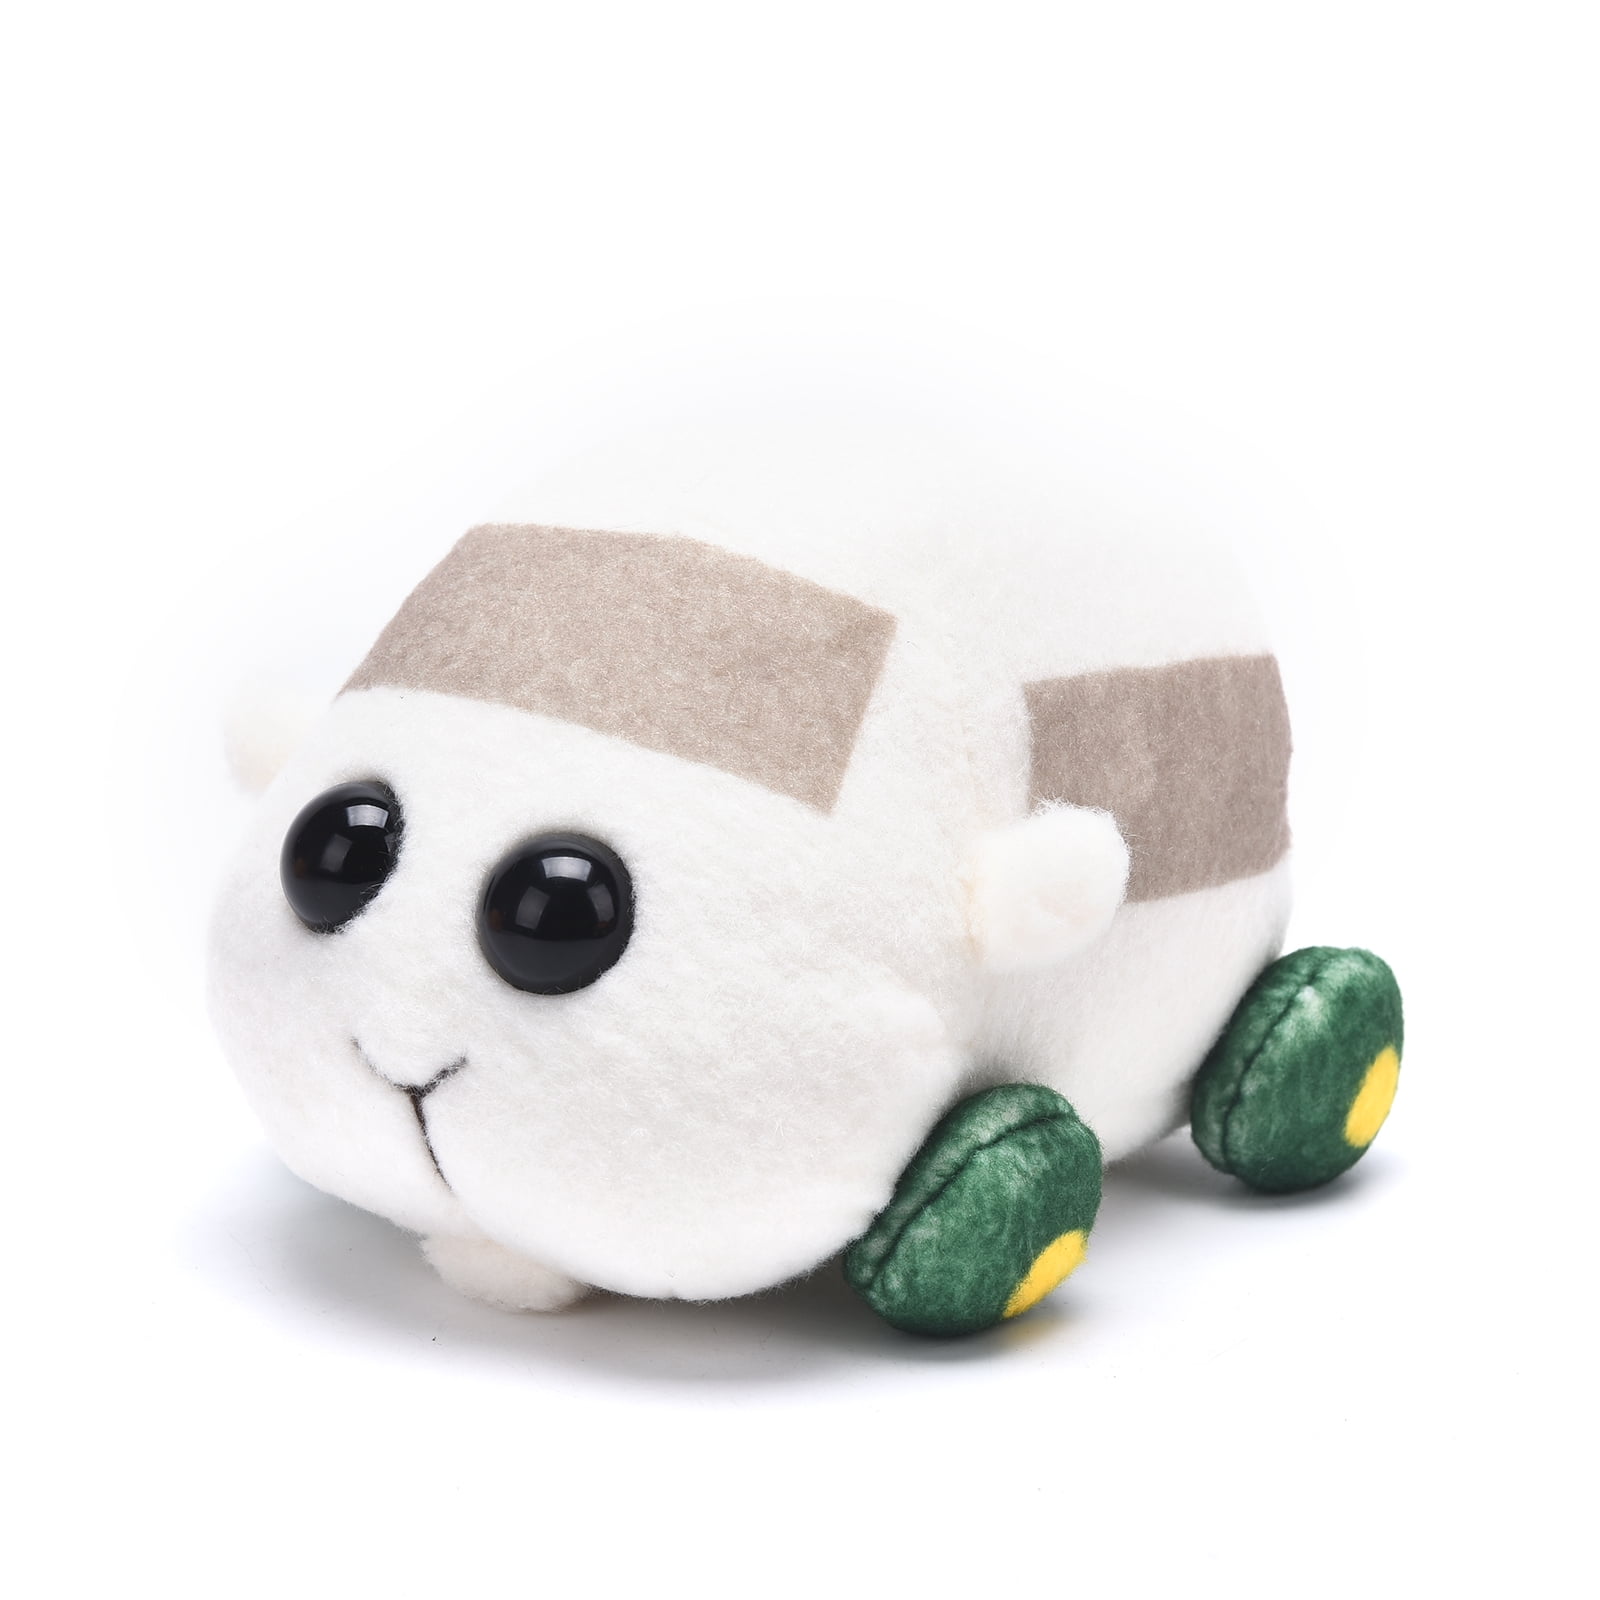 Details about   Guinea Pig Cart Doll PUI PUI Plush Toy Animal Mouse Stuffed Doll Birthday Gift0E